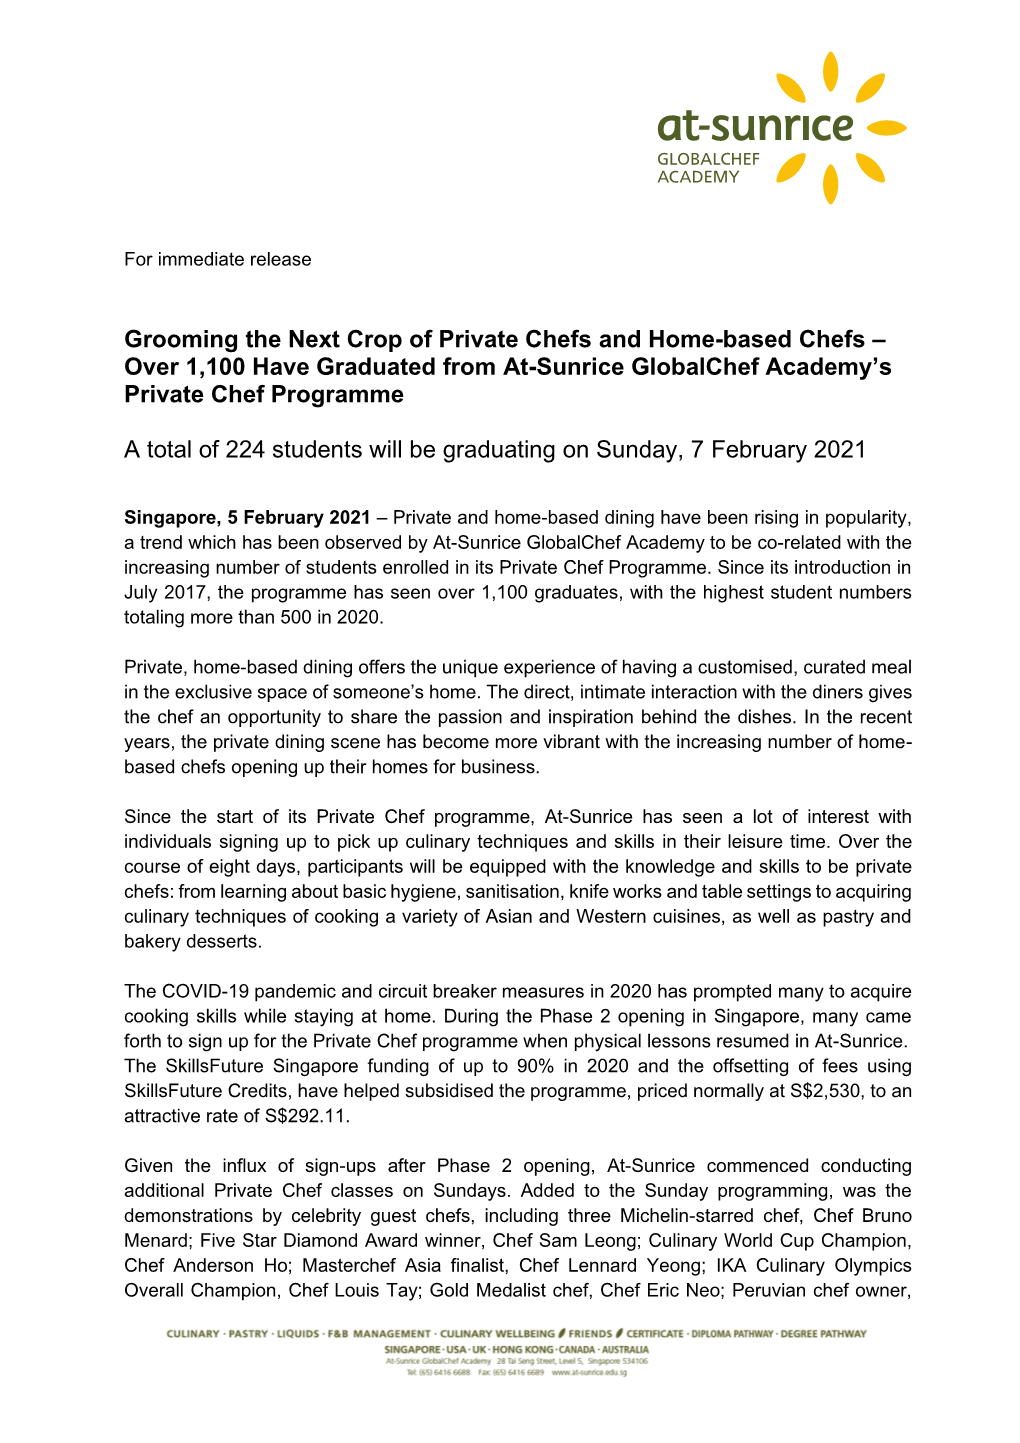 Grooming the Next Crop of Private Chefs and Home-Based Chefs – Over 1,100 Have Graduated from At-Sunrice Globalchef Academy’S Private Chef Programme